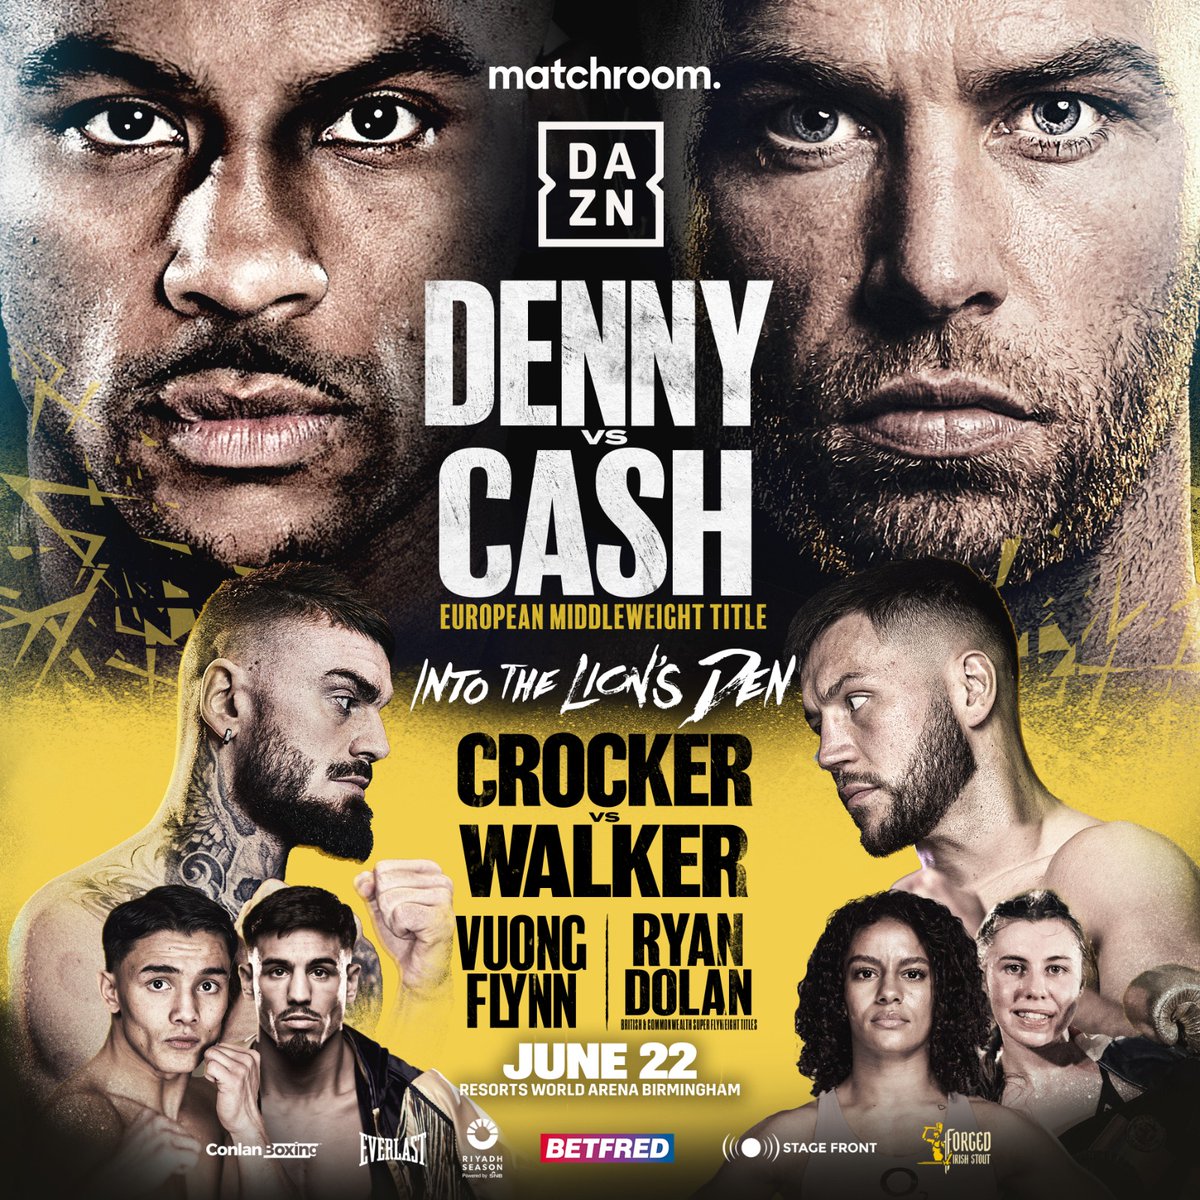 Matchroom Boxing announcing the Birmingham card on June 22nd #DennyCash headlines for the EBU European Middleweight title and also on the card #CrockerWalker #RyanDolan #VuongFlynn #MatchroomBoxing #Boxing